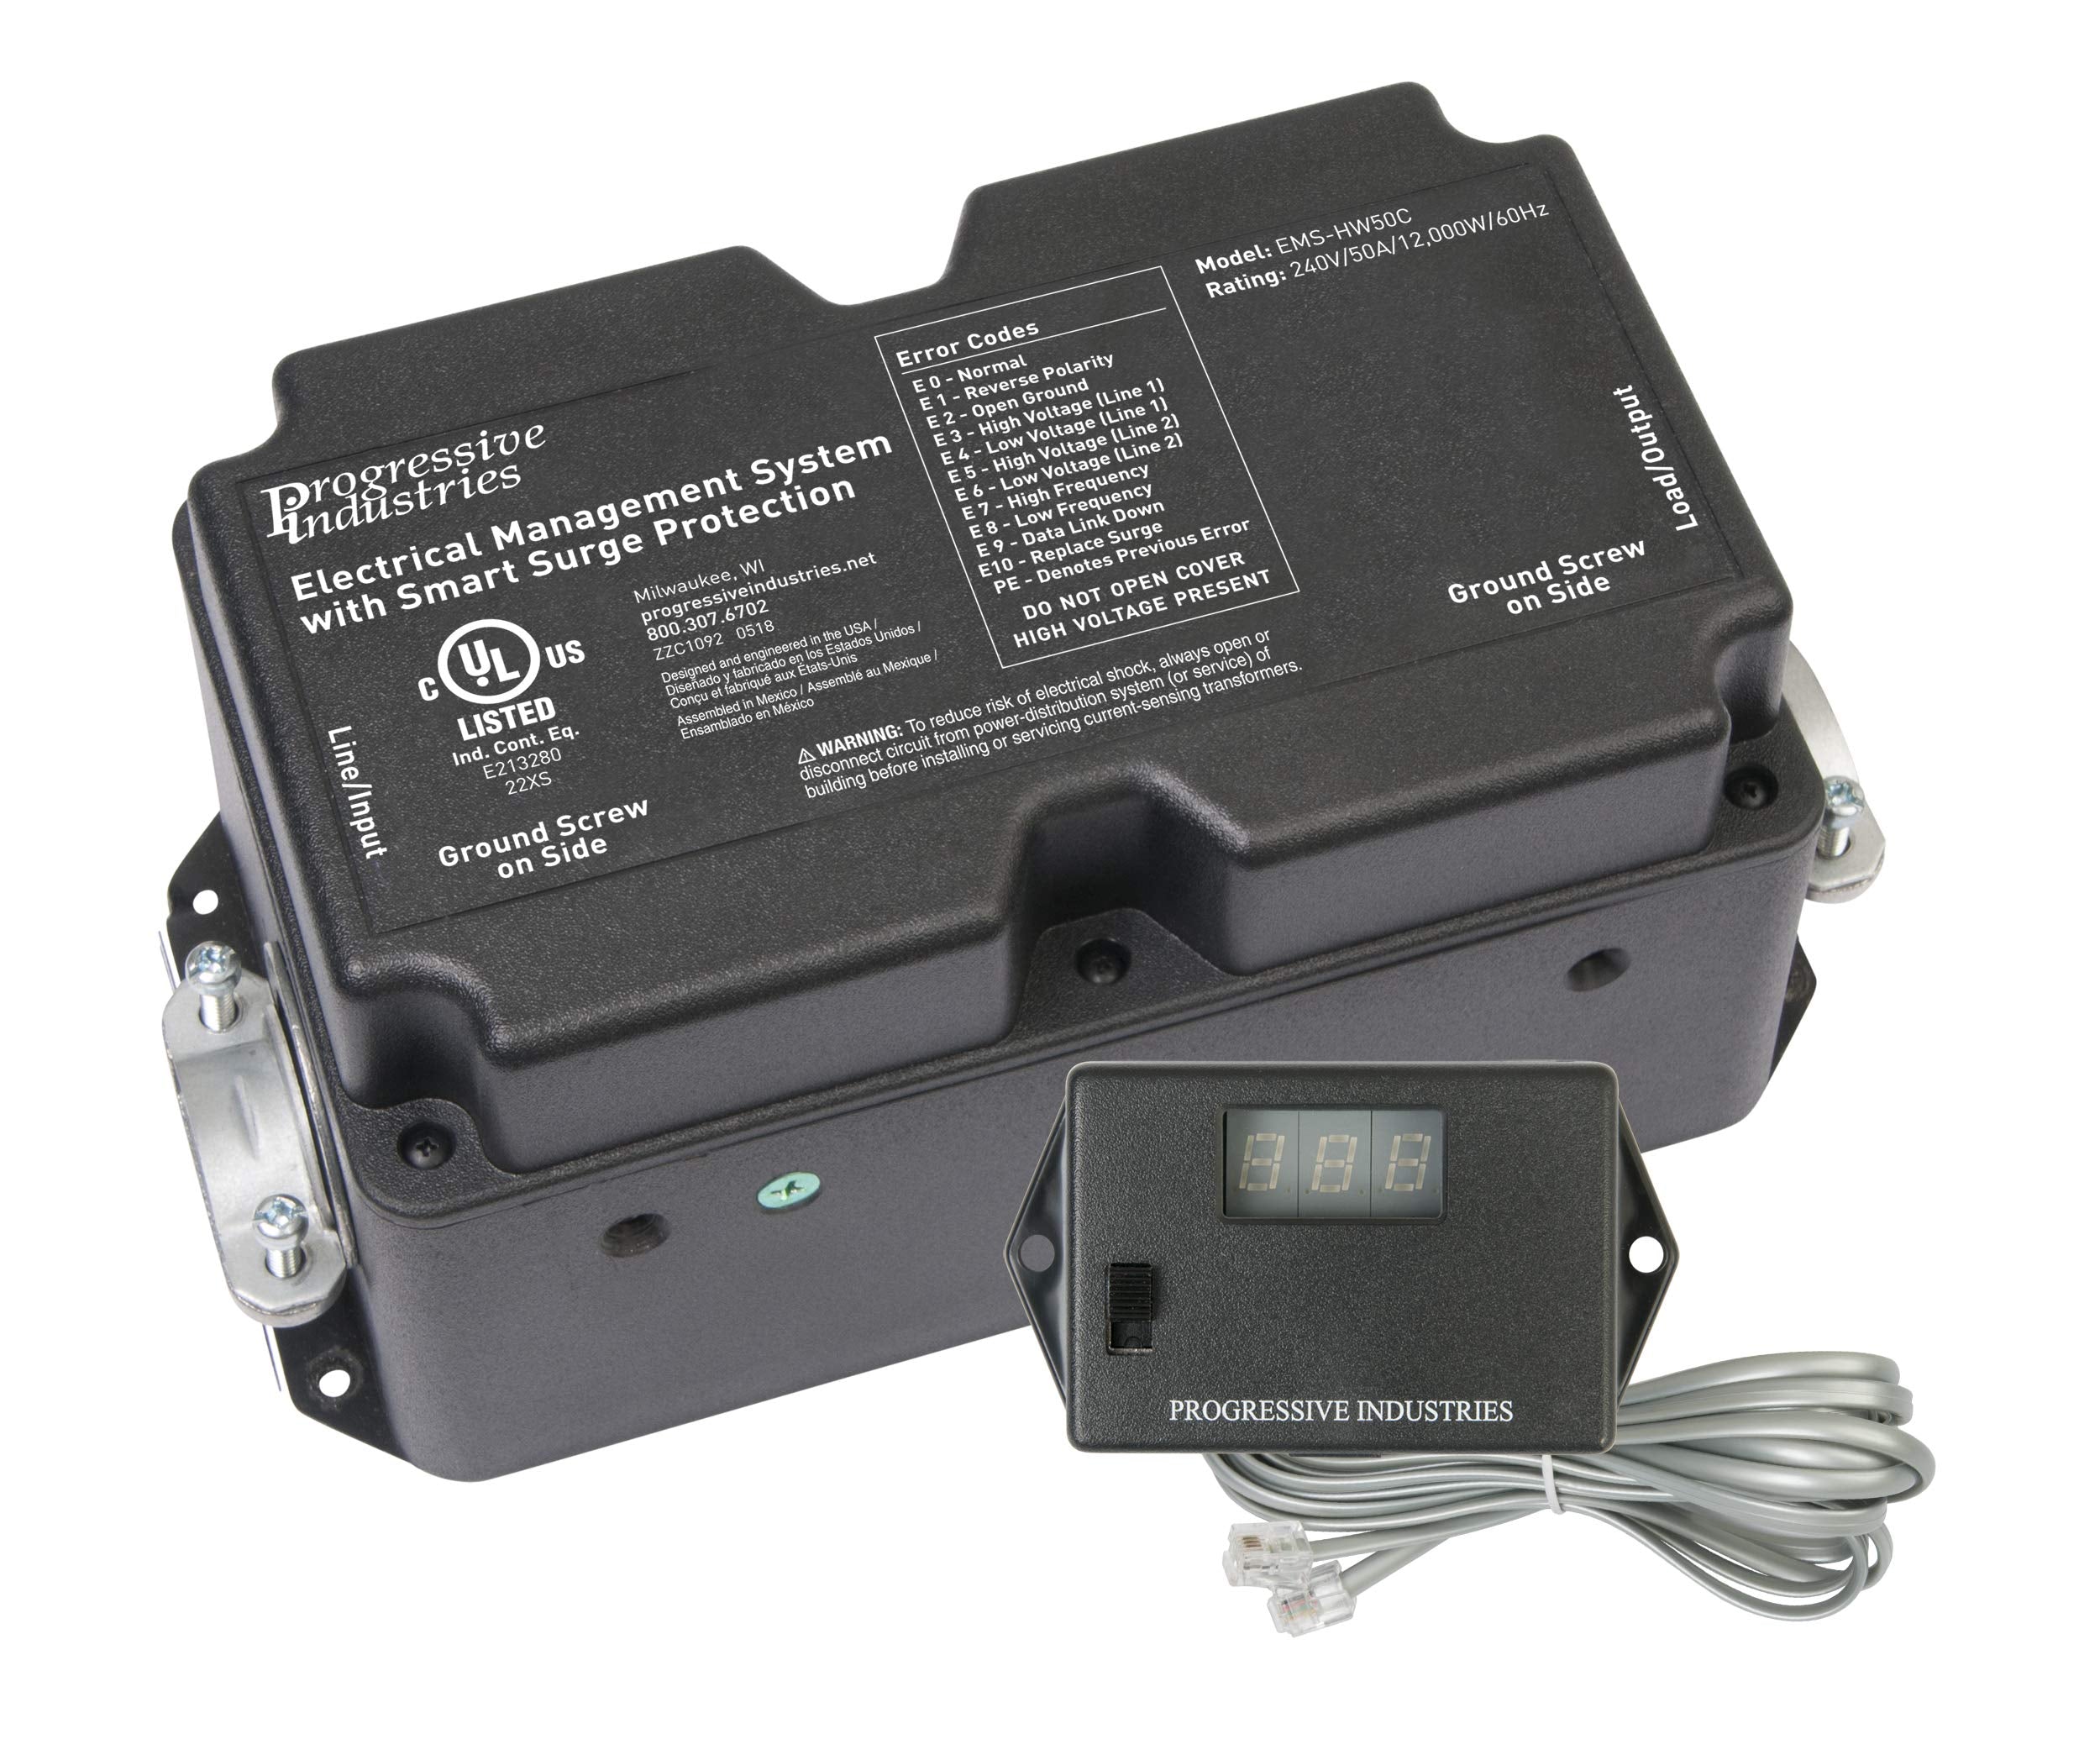 Progressive Industries HW50C Hardwired EMS Surge & Electrical Protection- 50 Amps (7530663182574)